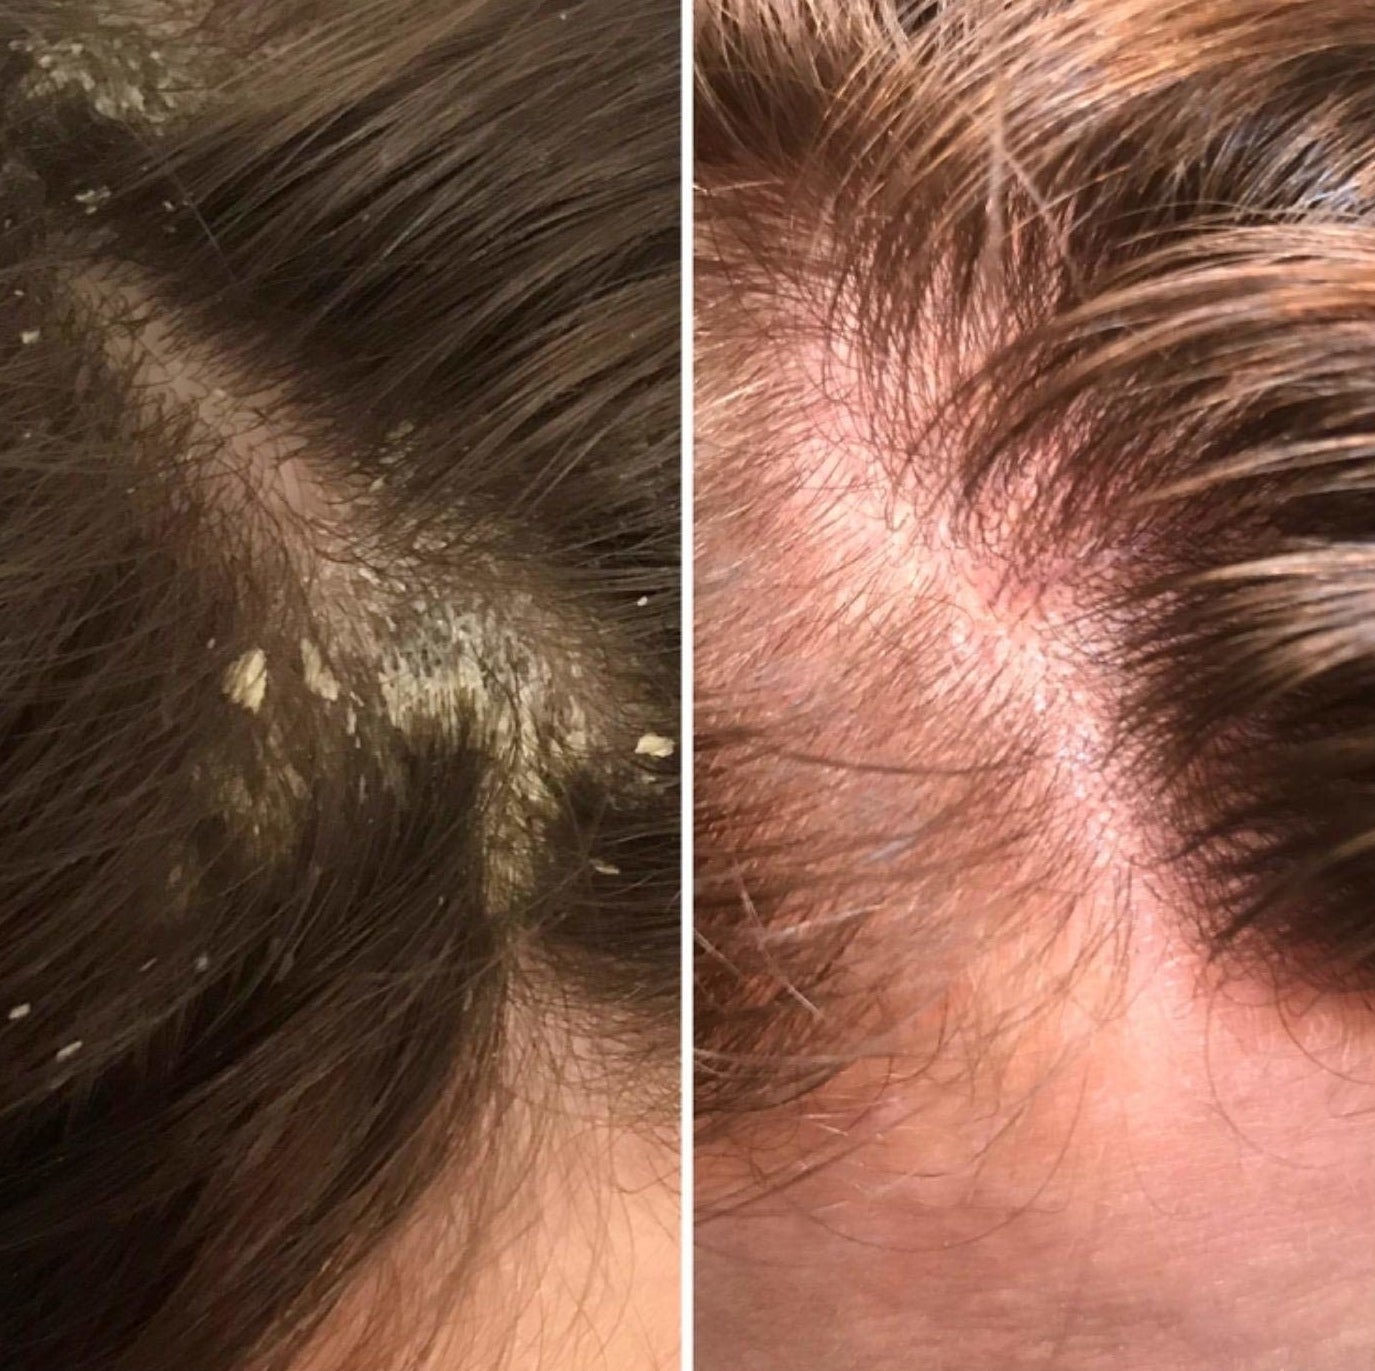 A before-and-after photo showing a head full of dandruff on the left and clear scalp on the right